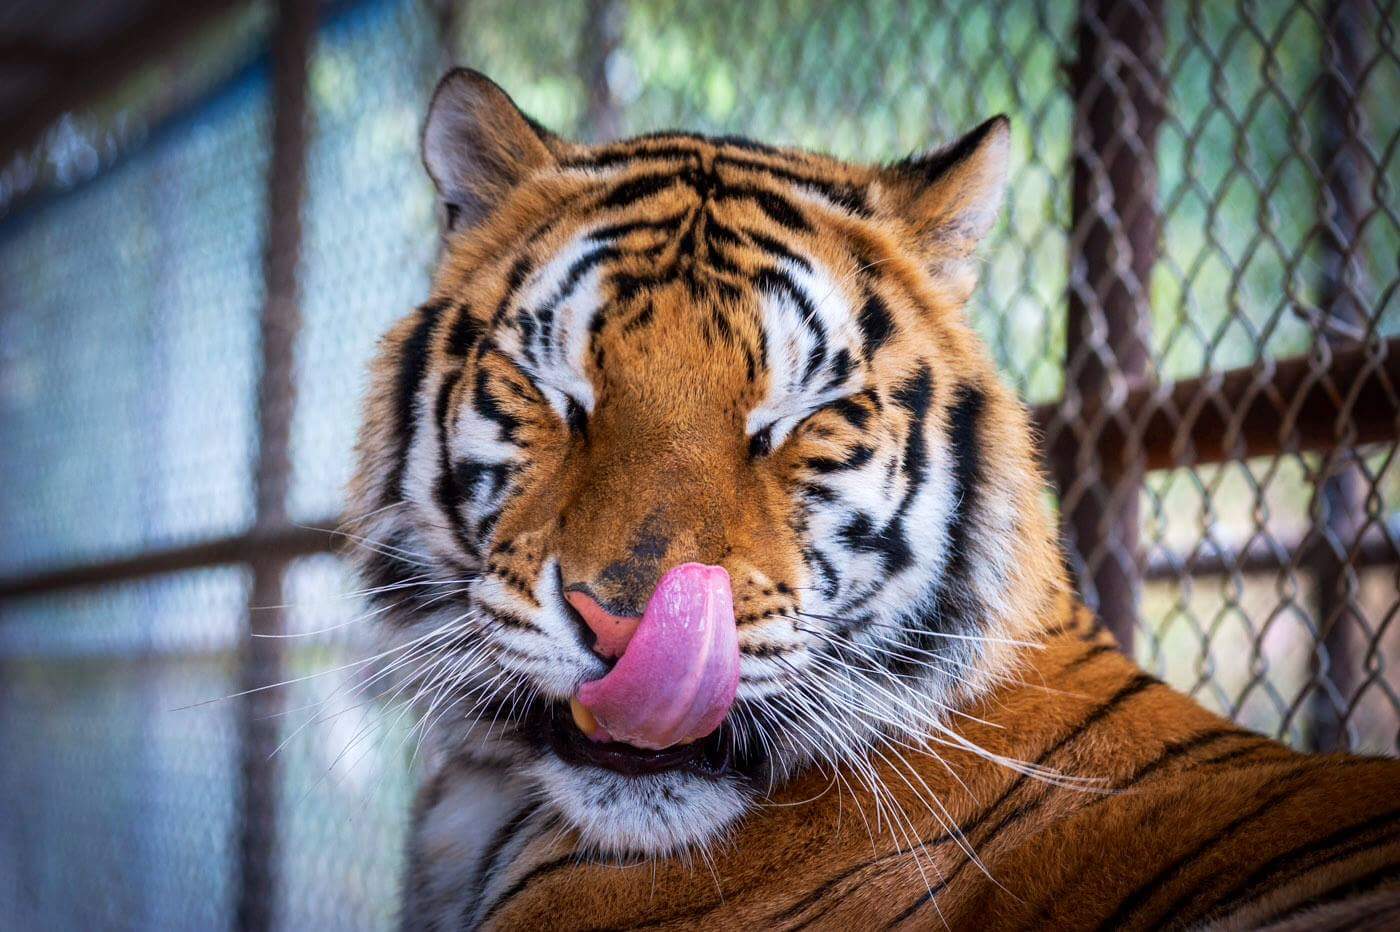 Valentine’s Pancake Breakfast with the Big Cats at In-Sync Exotics